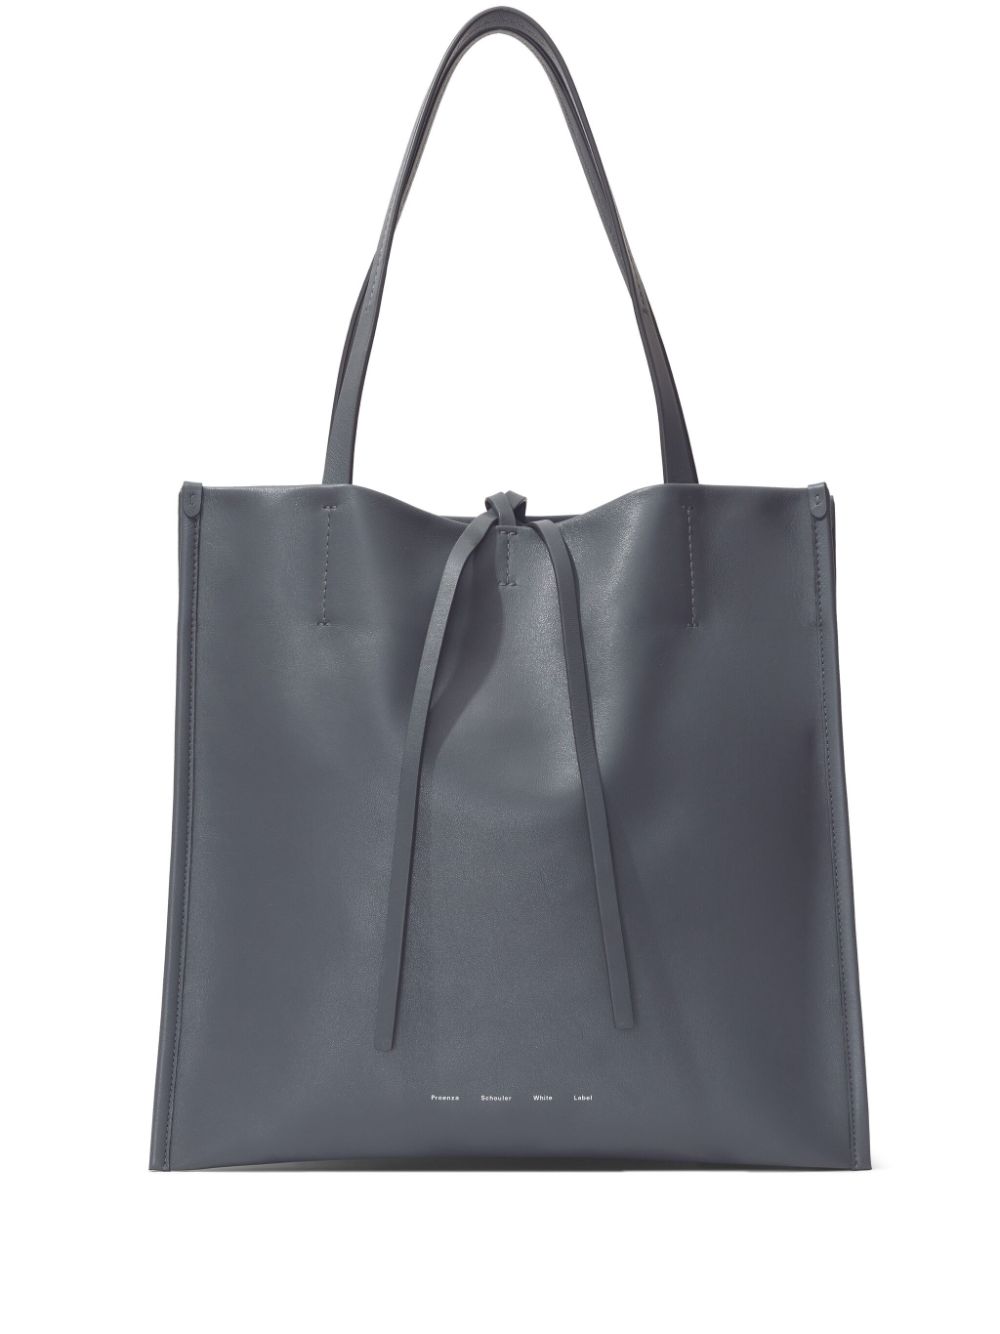 Proenza Schouler White Label Twin Leather Tote Bag In Grey